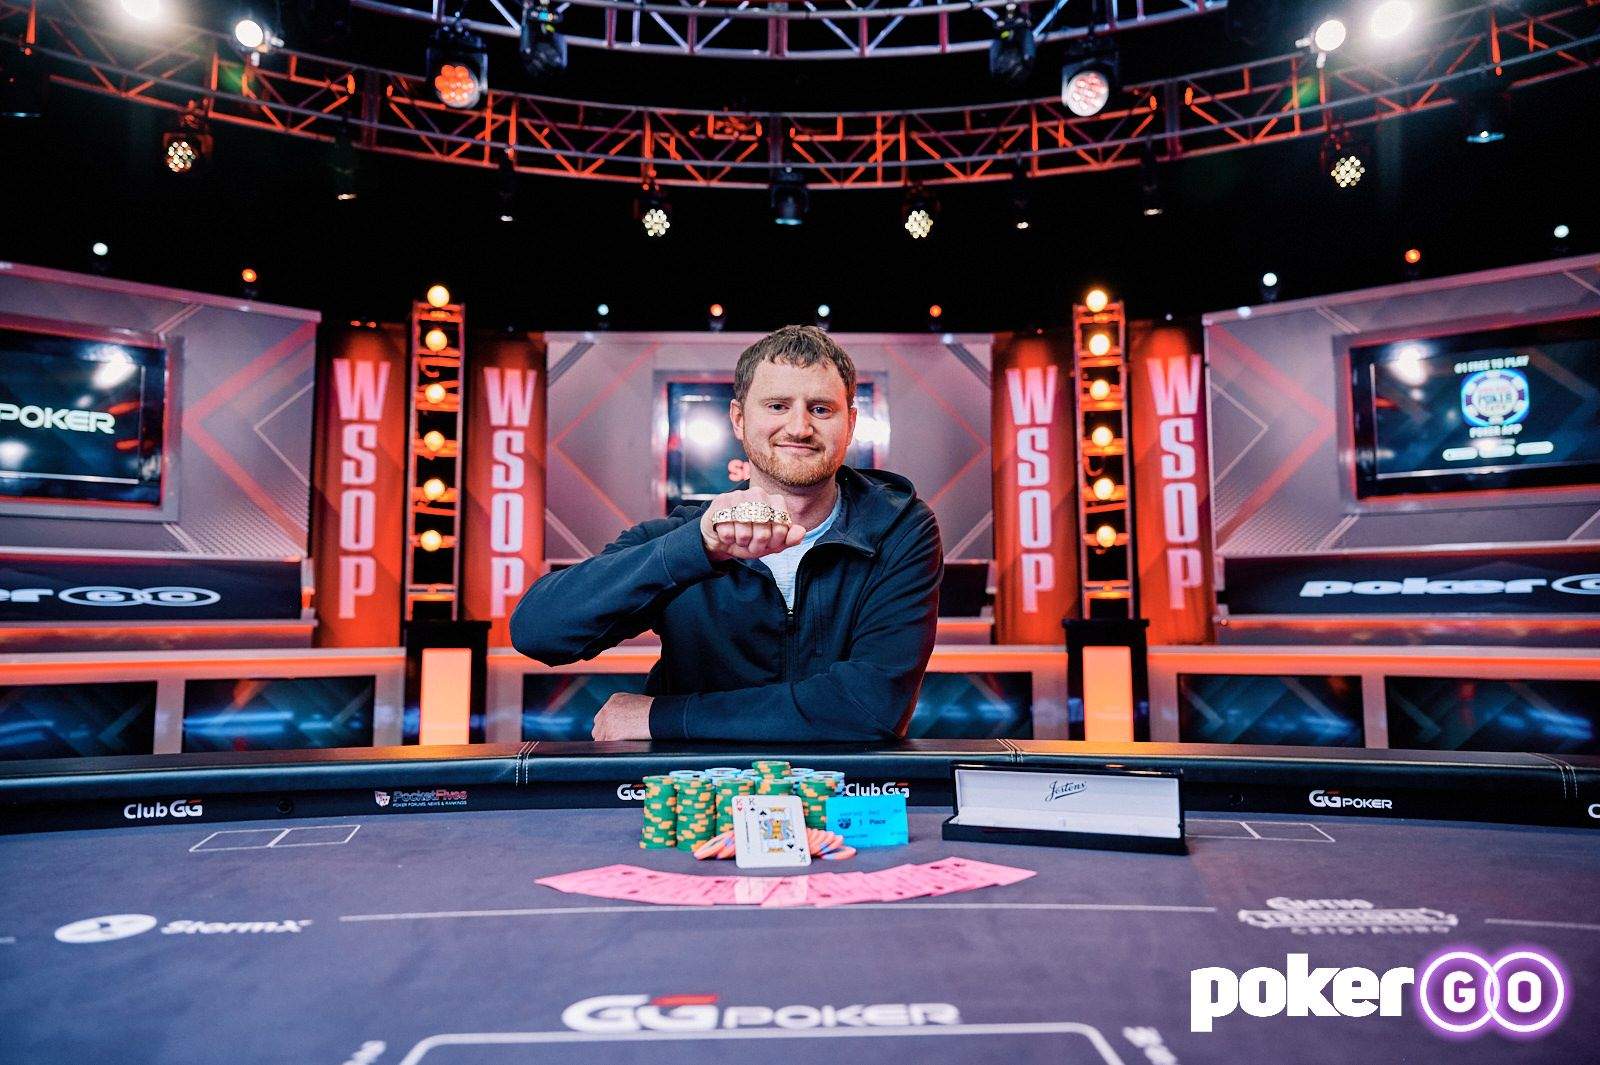 WSOP Day 3 Recap: David Peters Wins Fourth Bracelet; Ivey, Smith and Foxen All Make Day 2 of Heads Up Championship